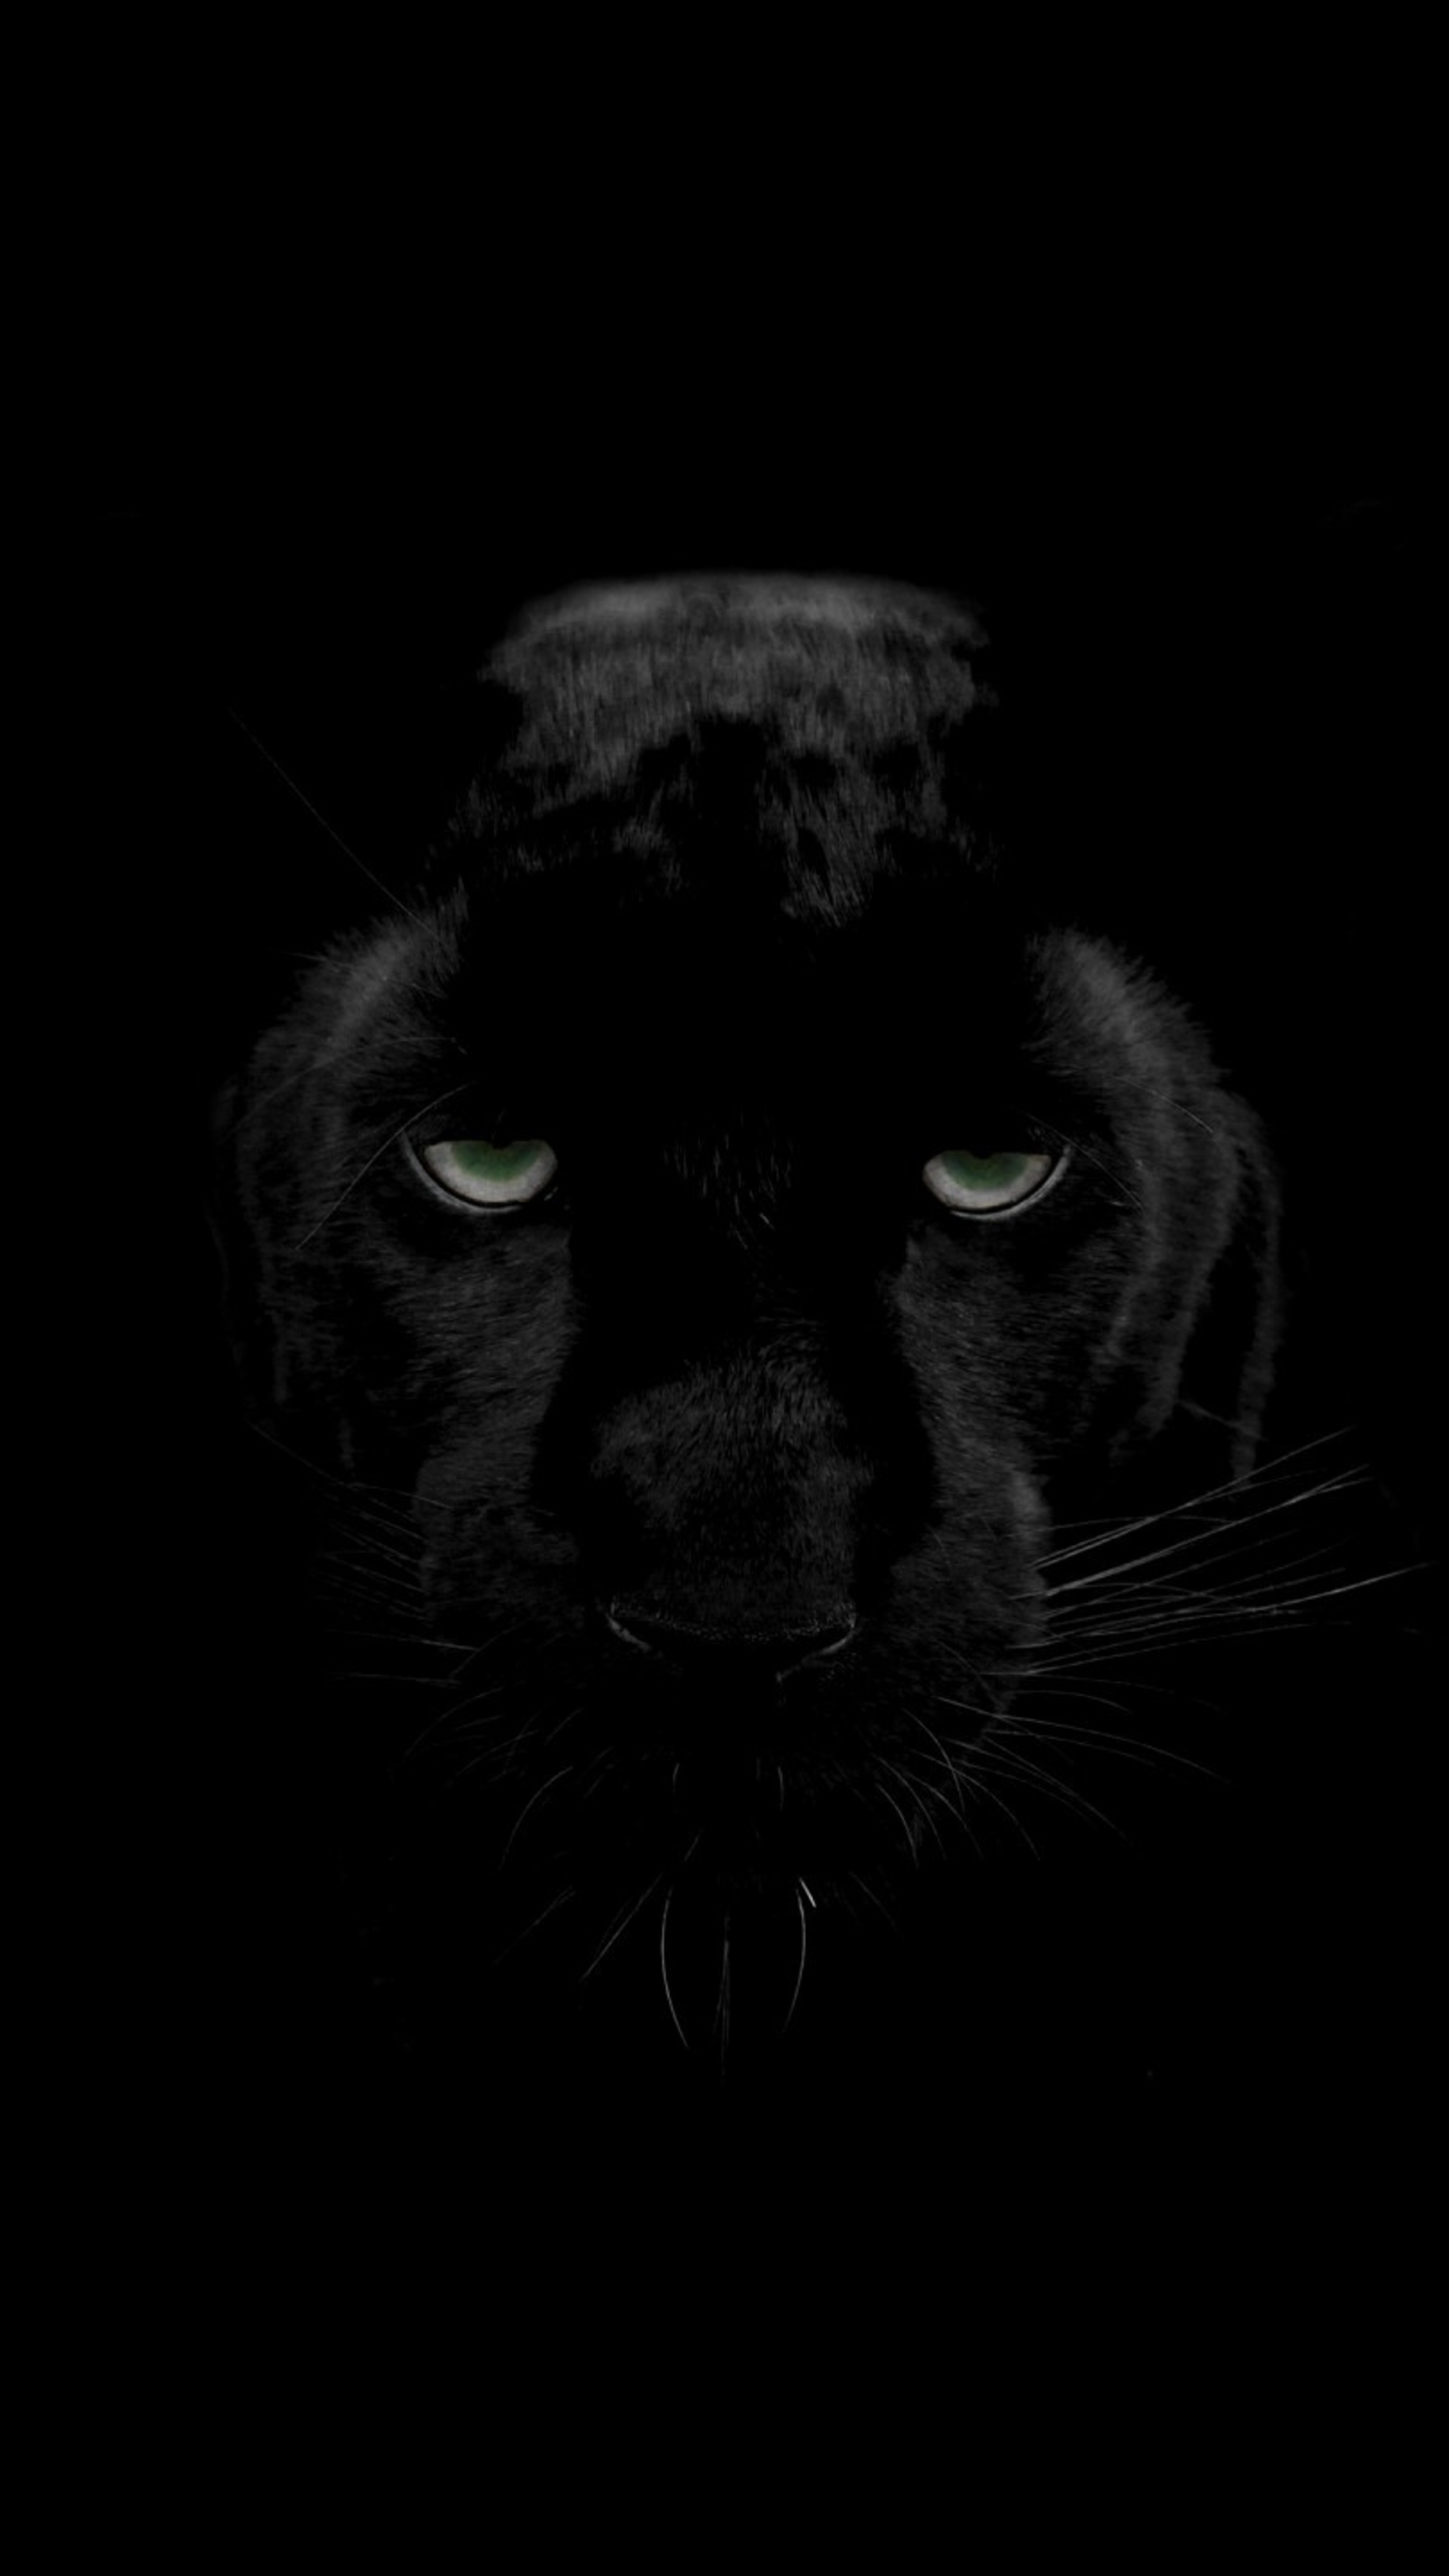 Black Panther (Animal): Jaguars (P. onca) of Central and South America, Felidae. 2160x3840 4K Background.